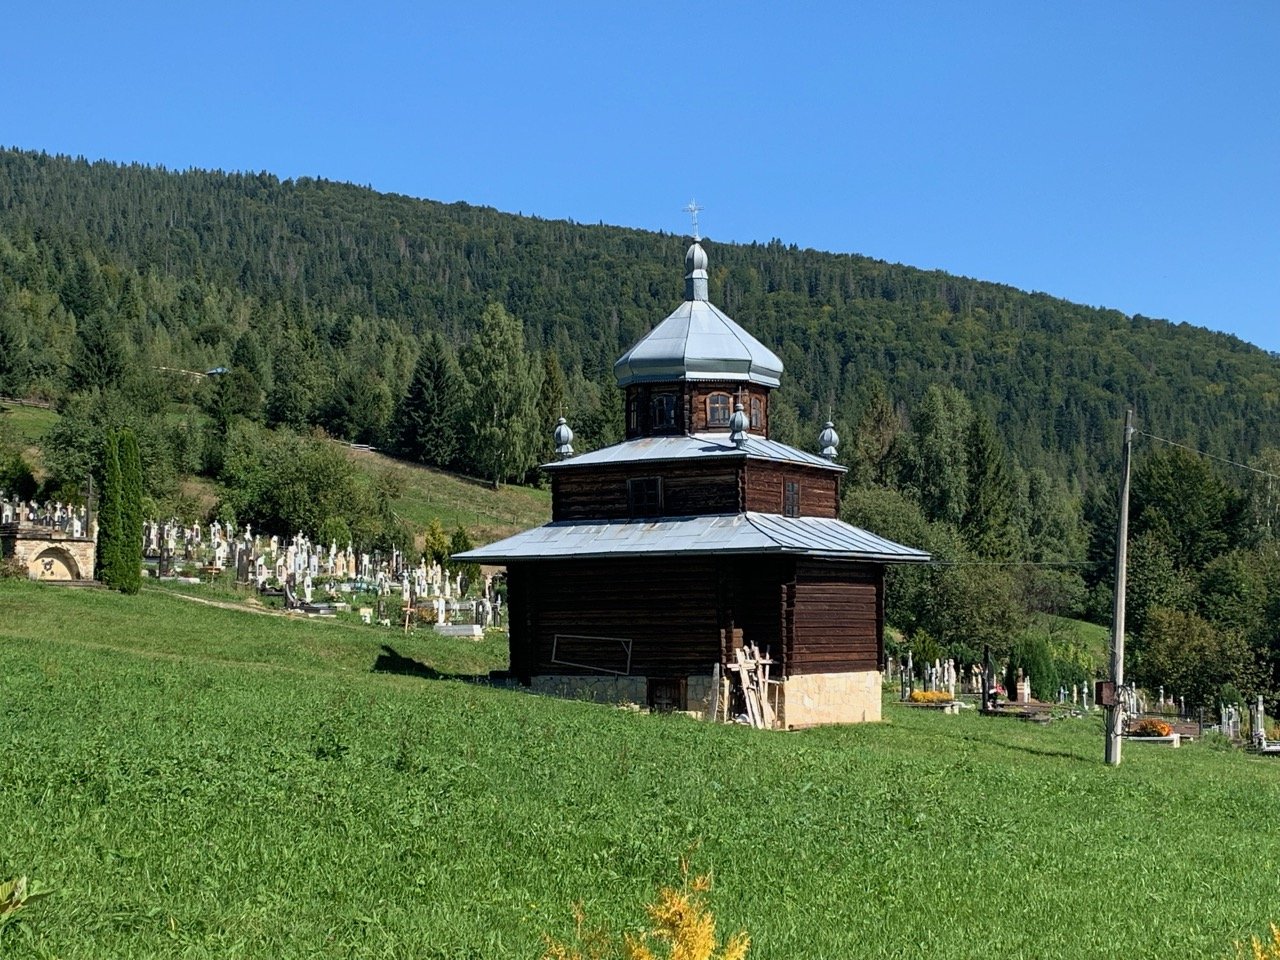 Wooden churches and chapels are an interesting cultural feature and example of folk architecture in the Carpathians. Some of the larger ones have been inscribed as UNESCO World Heritage Sites.